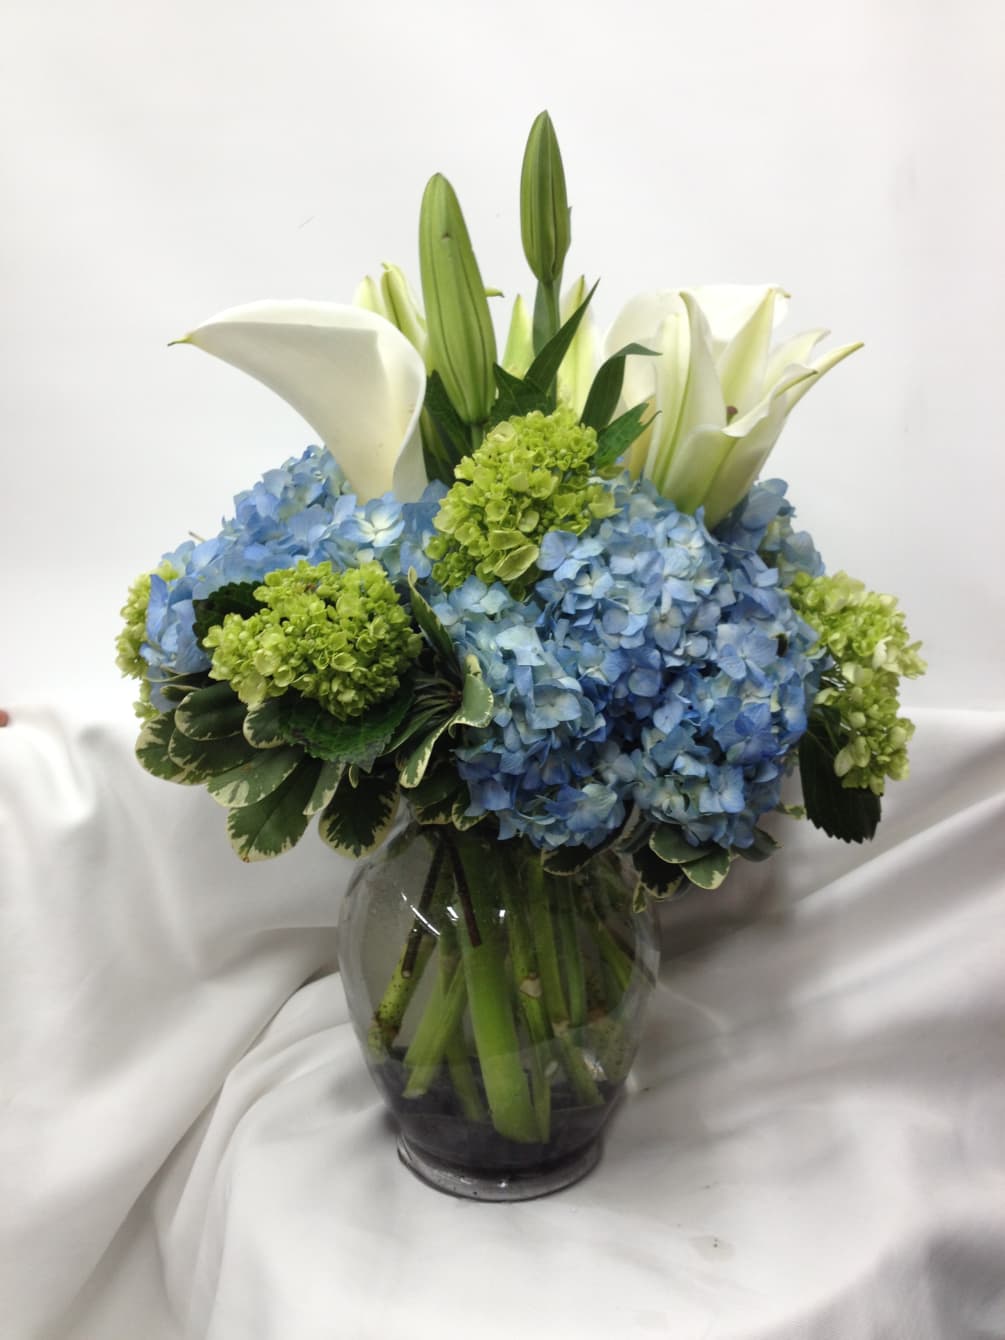 A sophisticated display of fresh elegant flowers handcrafted in a glass vase.